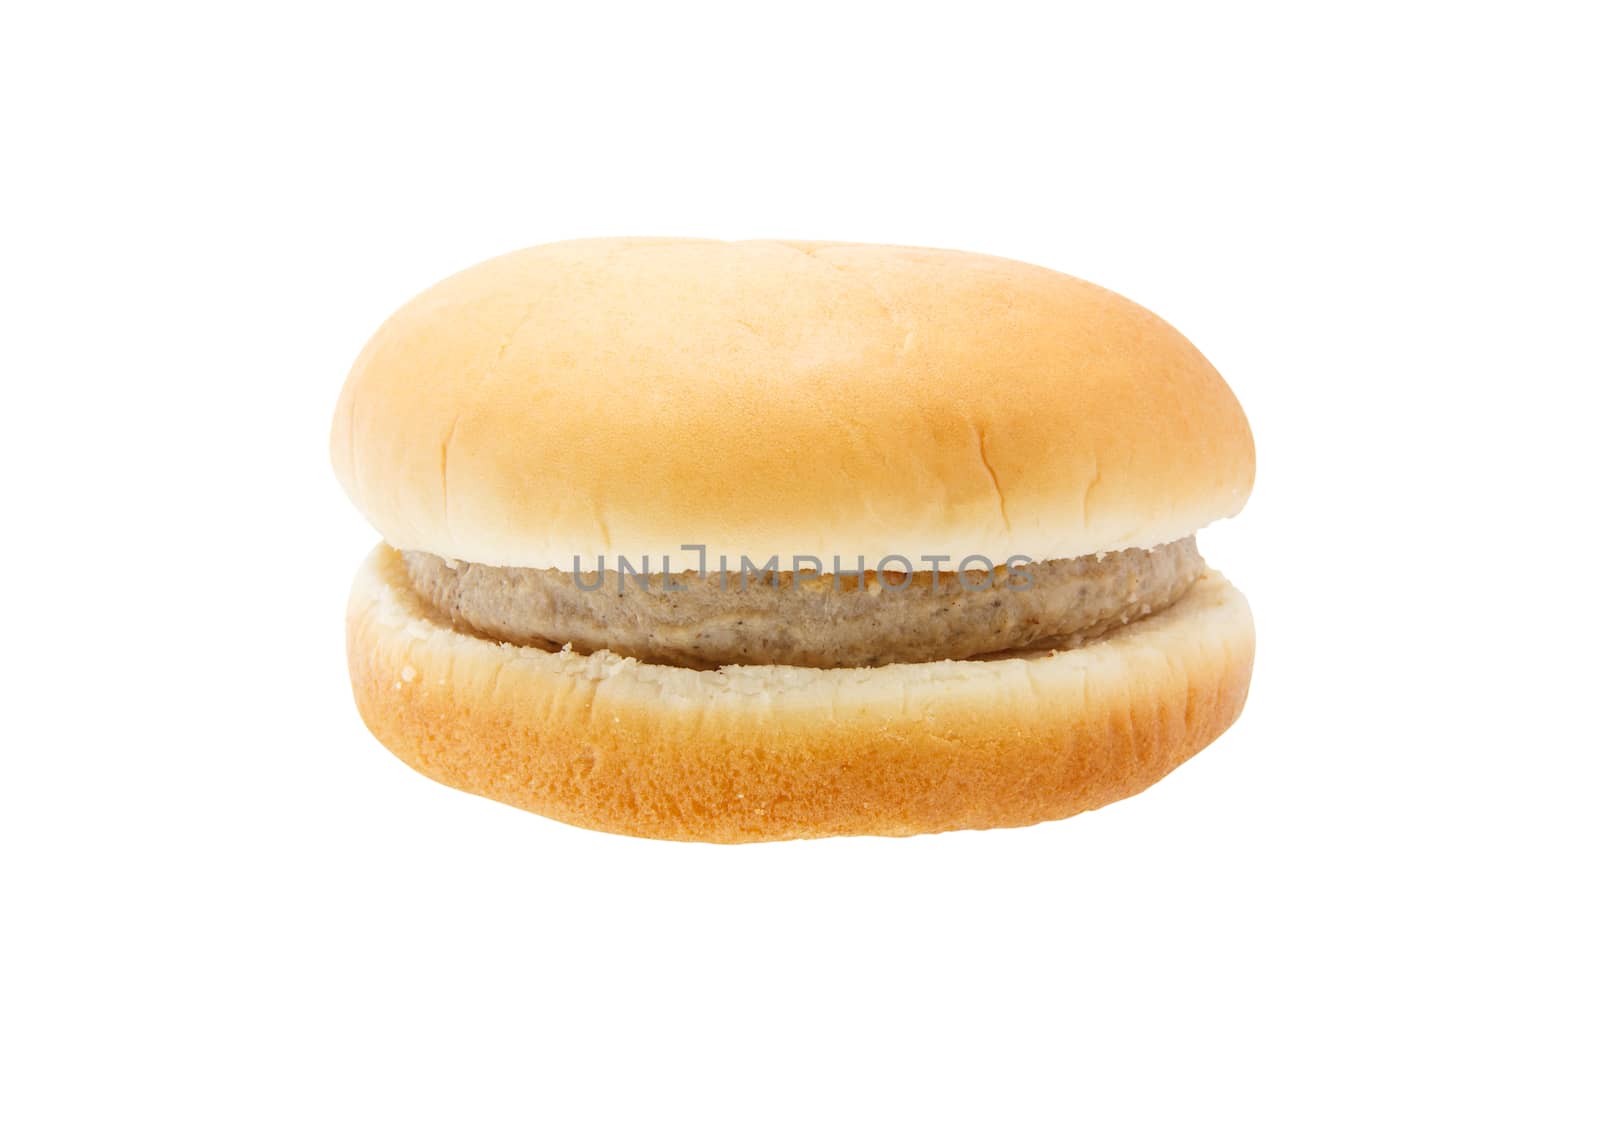 Pork burger isolated on a white background